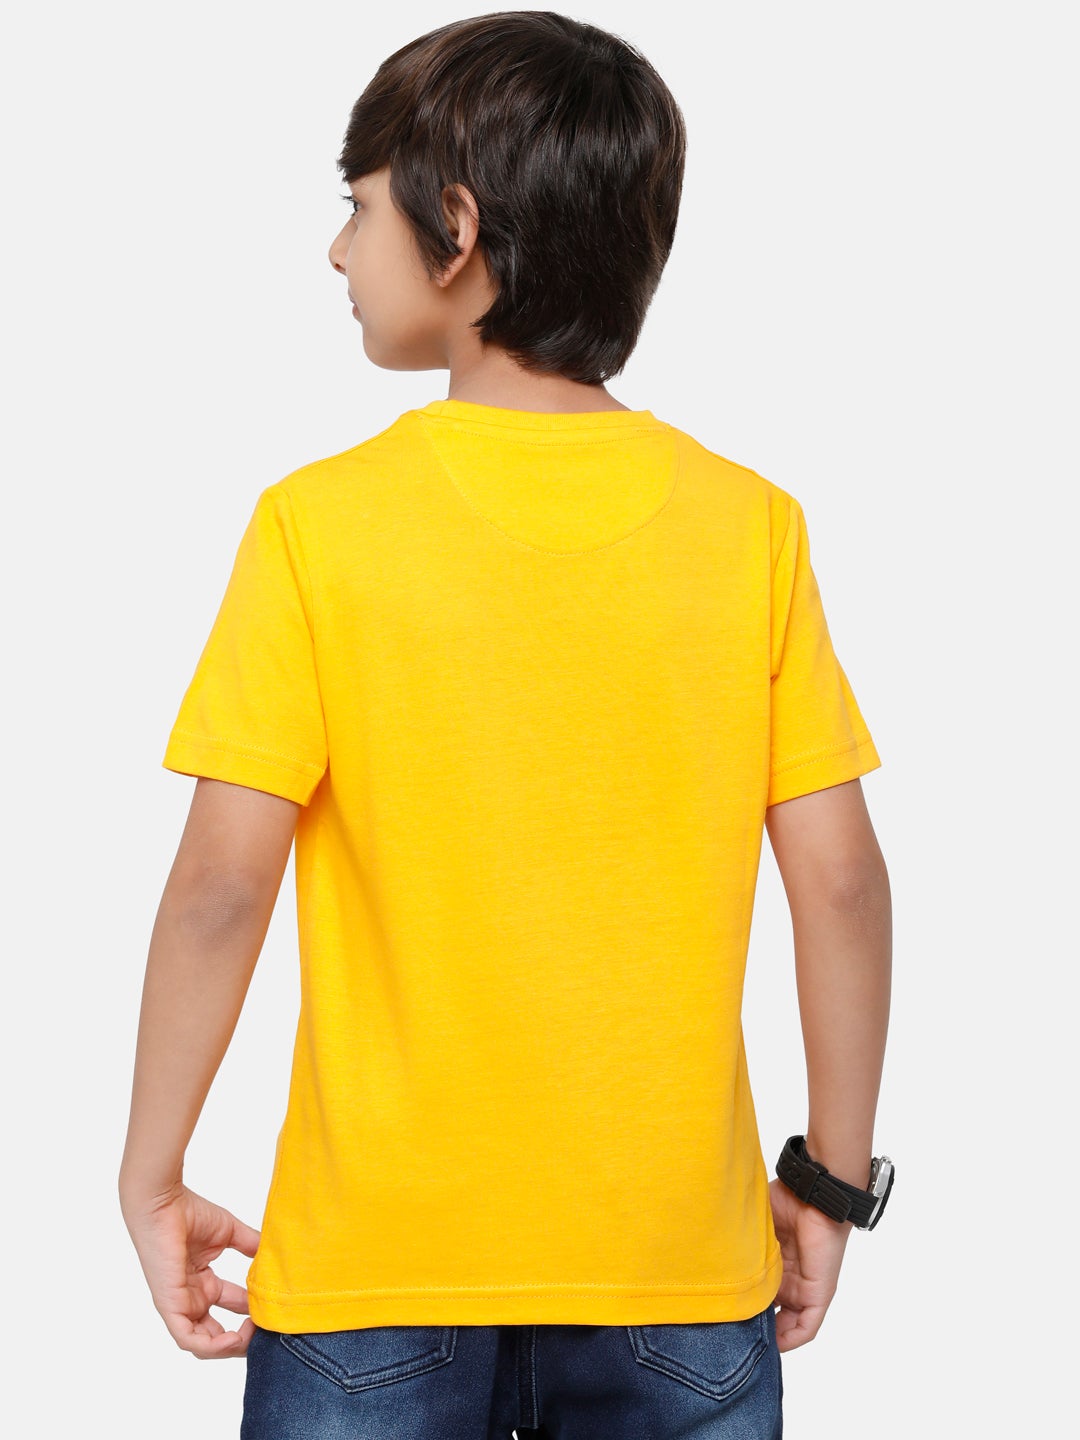 CP Boys Yellow Slim Fit Round Neck T-Shirt T-shirt Classic Polo 